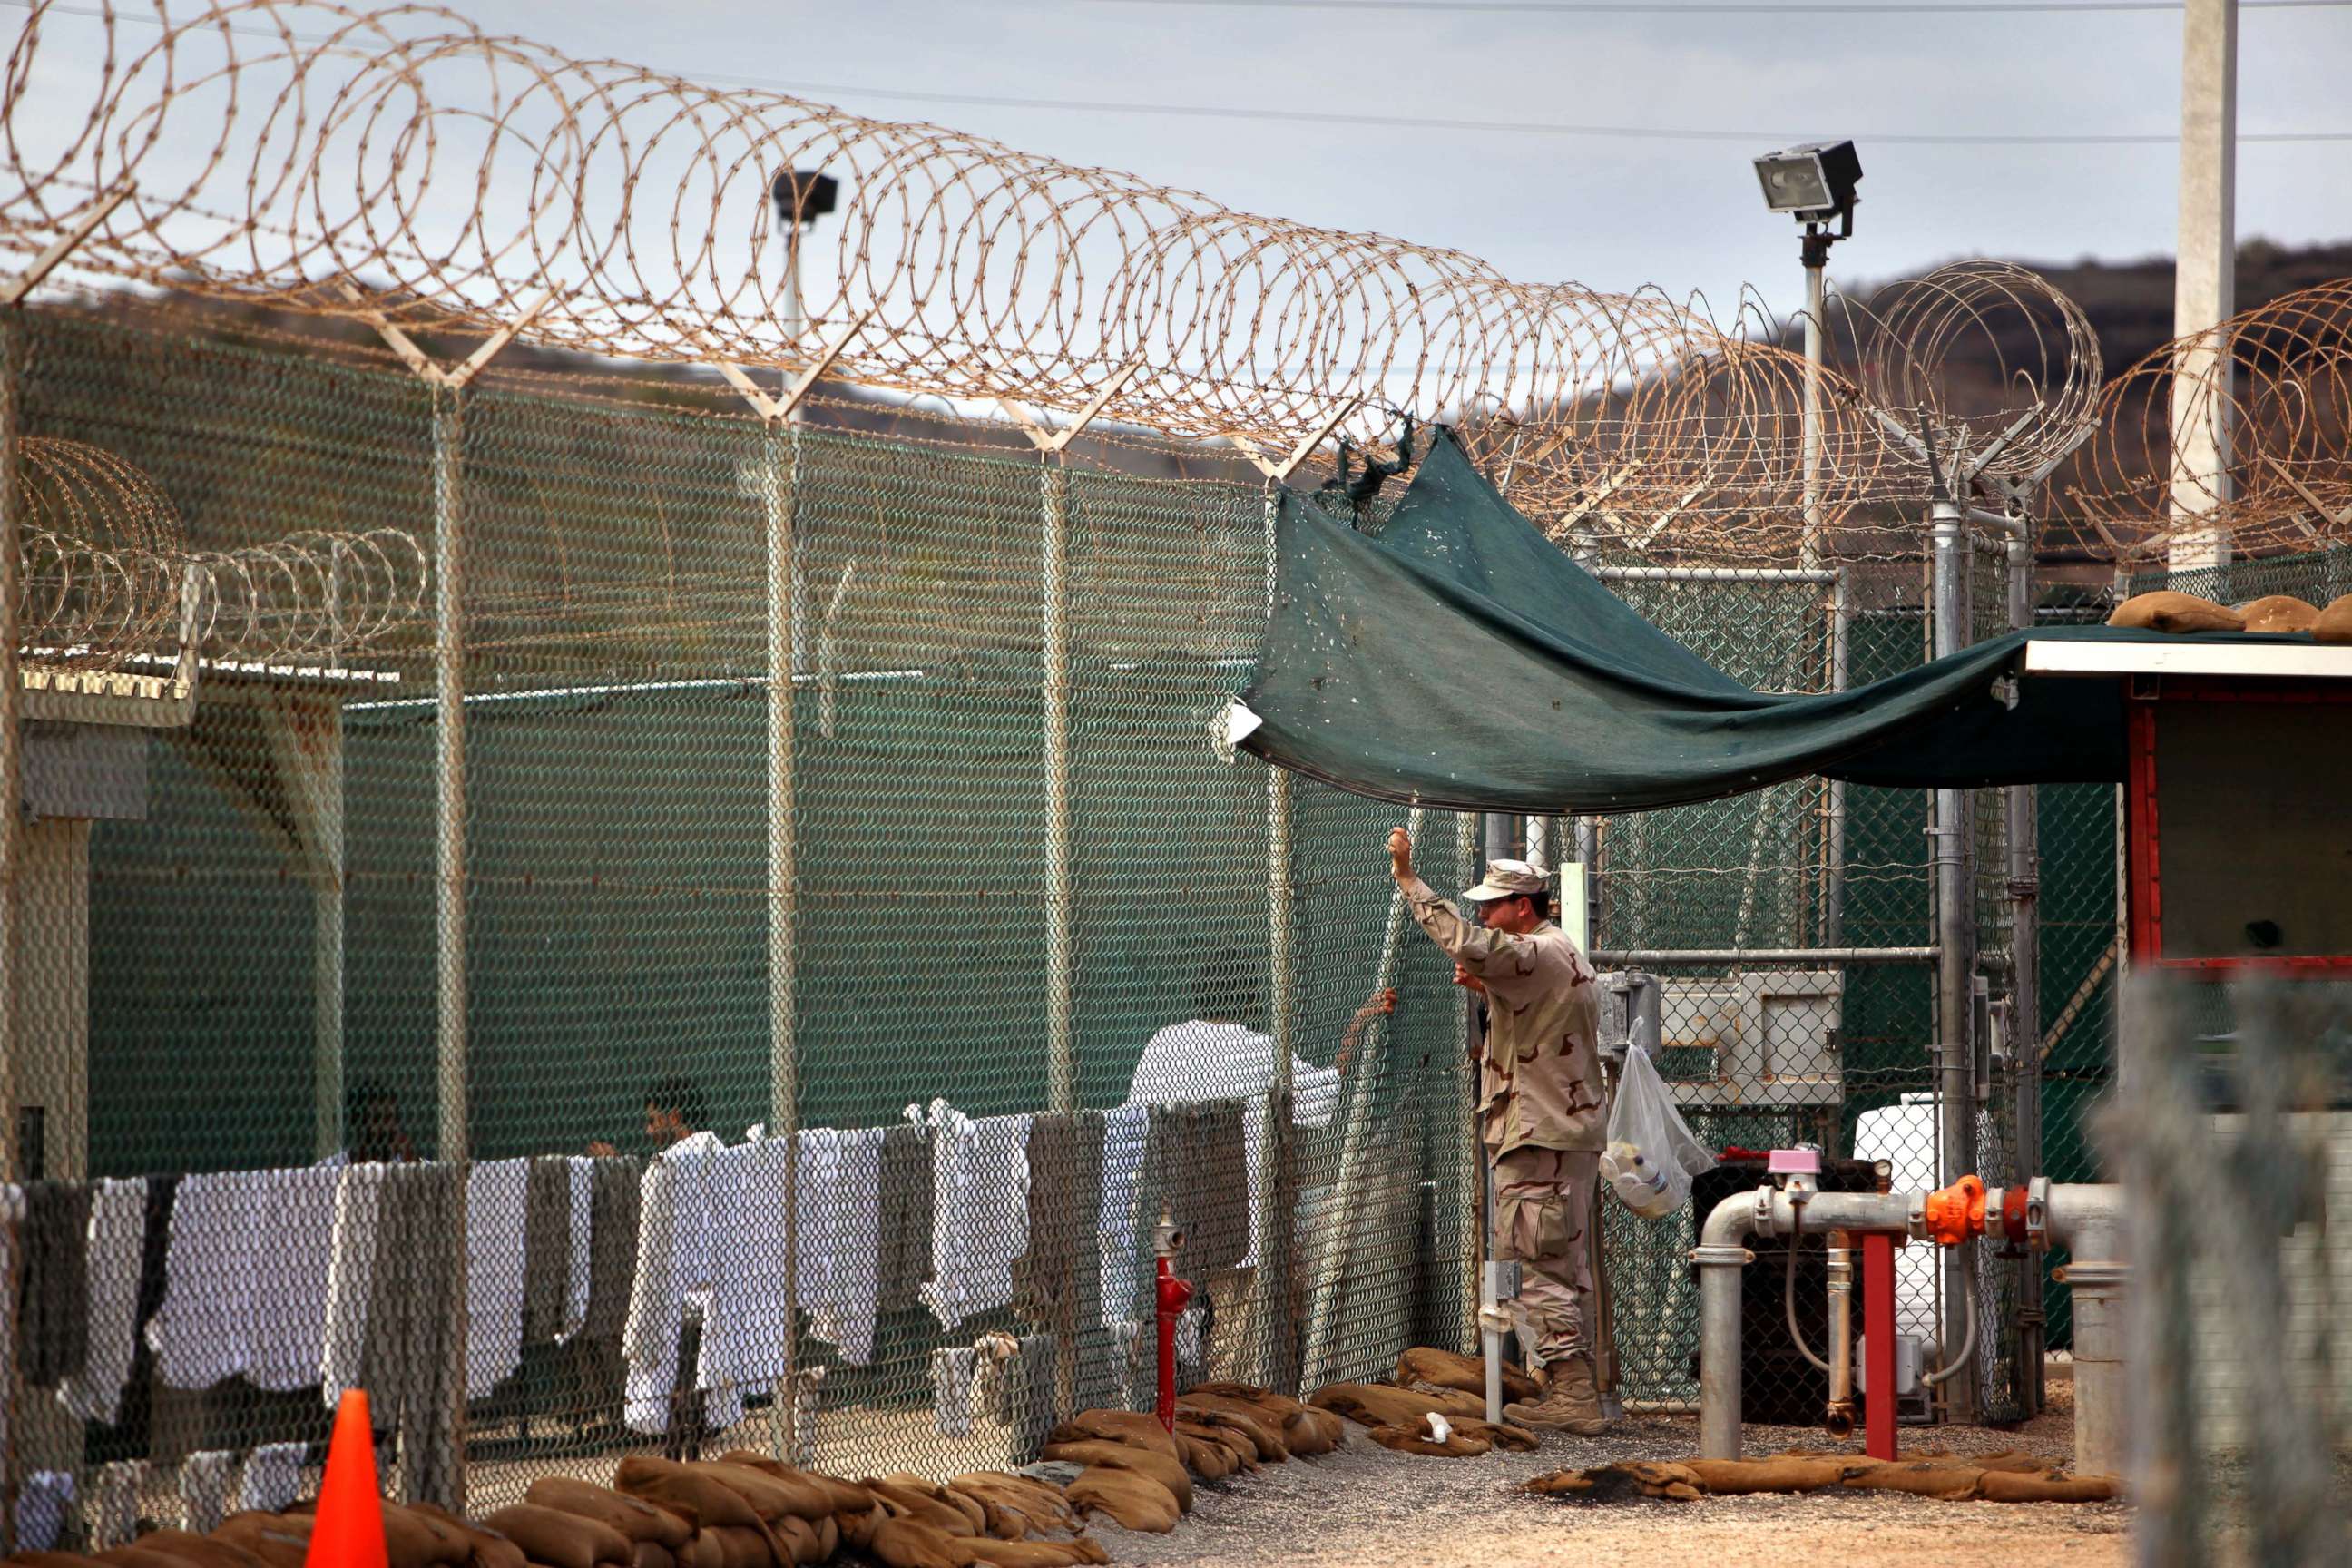 PHOTO: A U.S. Army guard leans on a fence talking to a Guantanamo detainee, inside the open yard at Camp 4 detention center, at the U.S. Naval Base, in Guantanamo Bay, Cuba, Jan. 21, 2009.